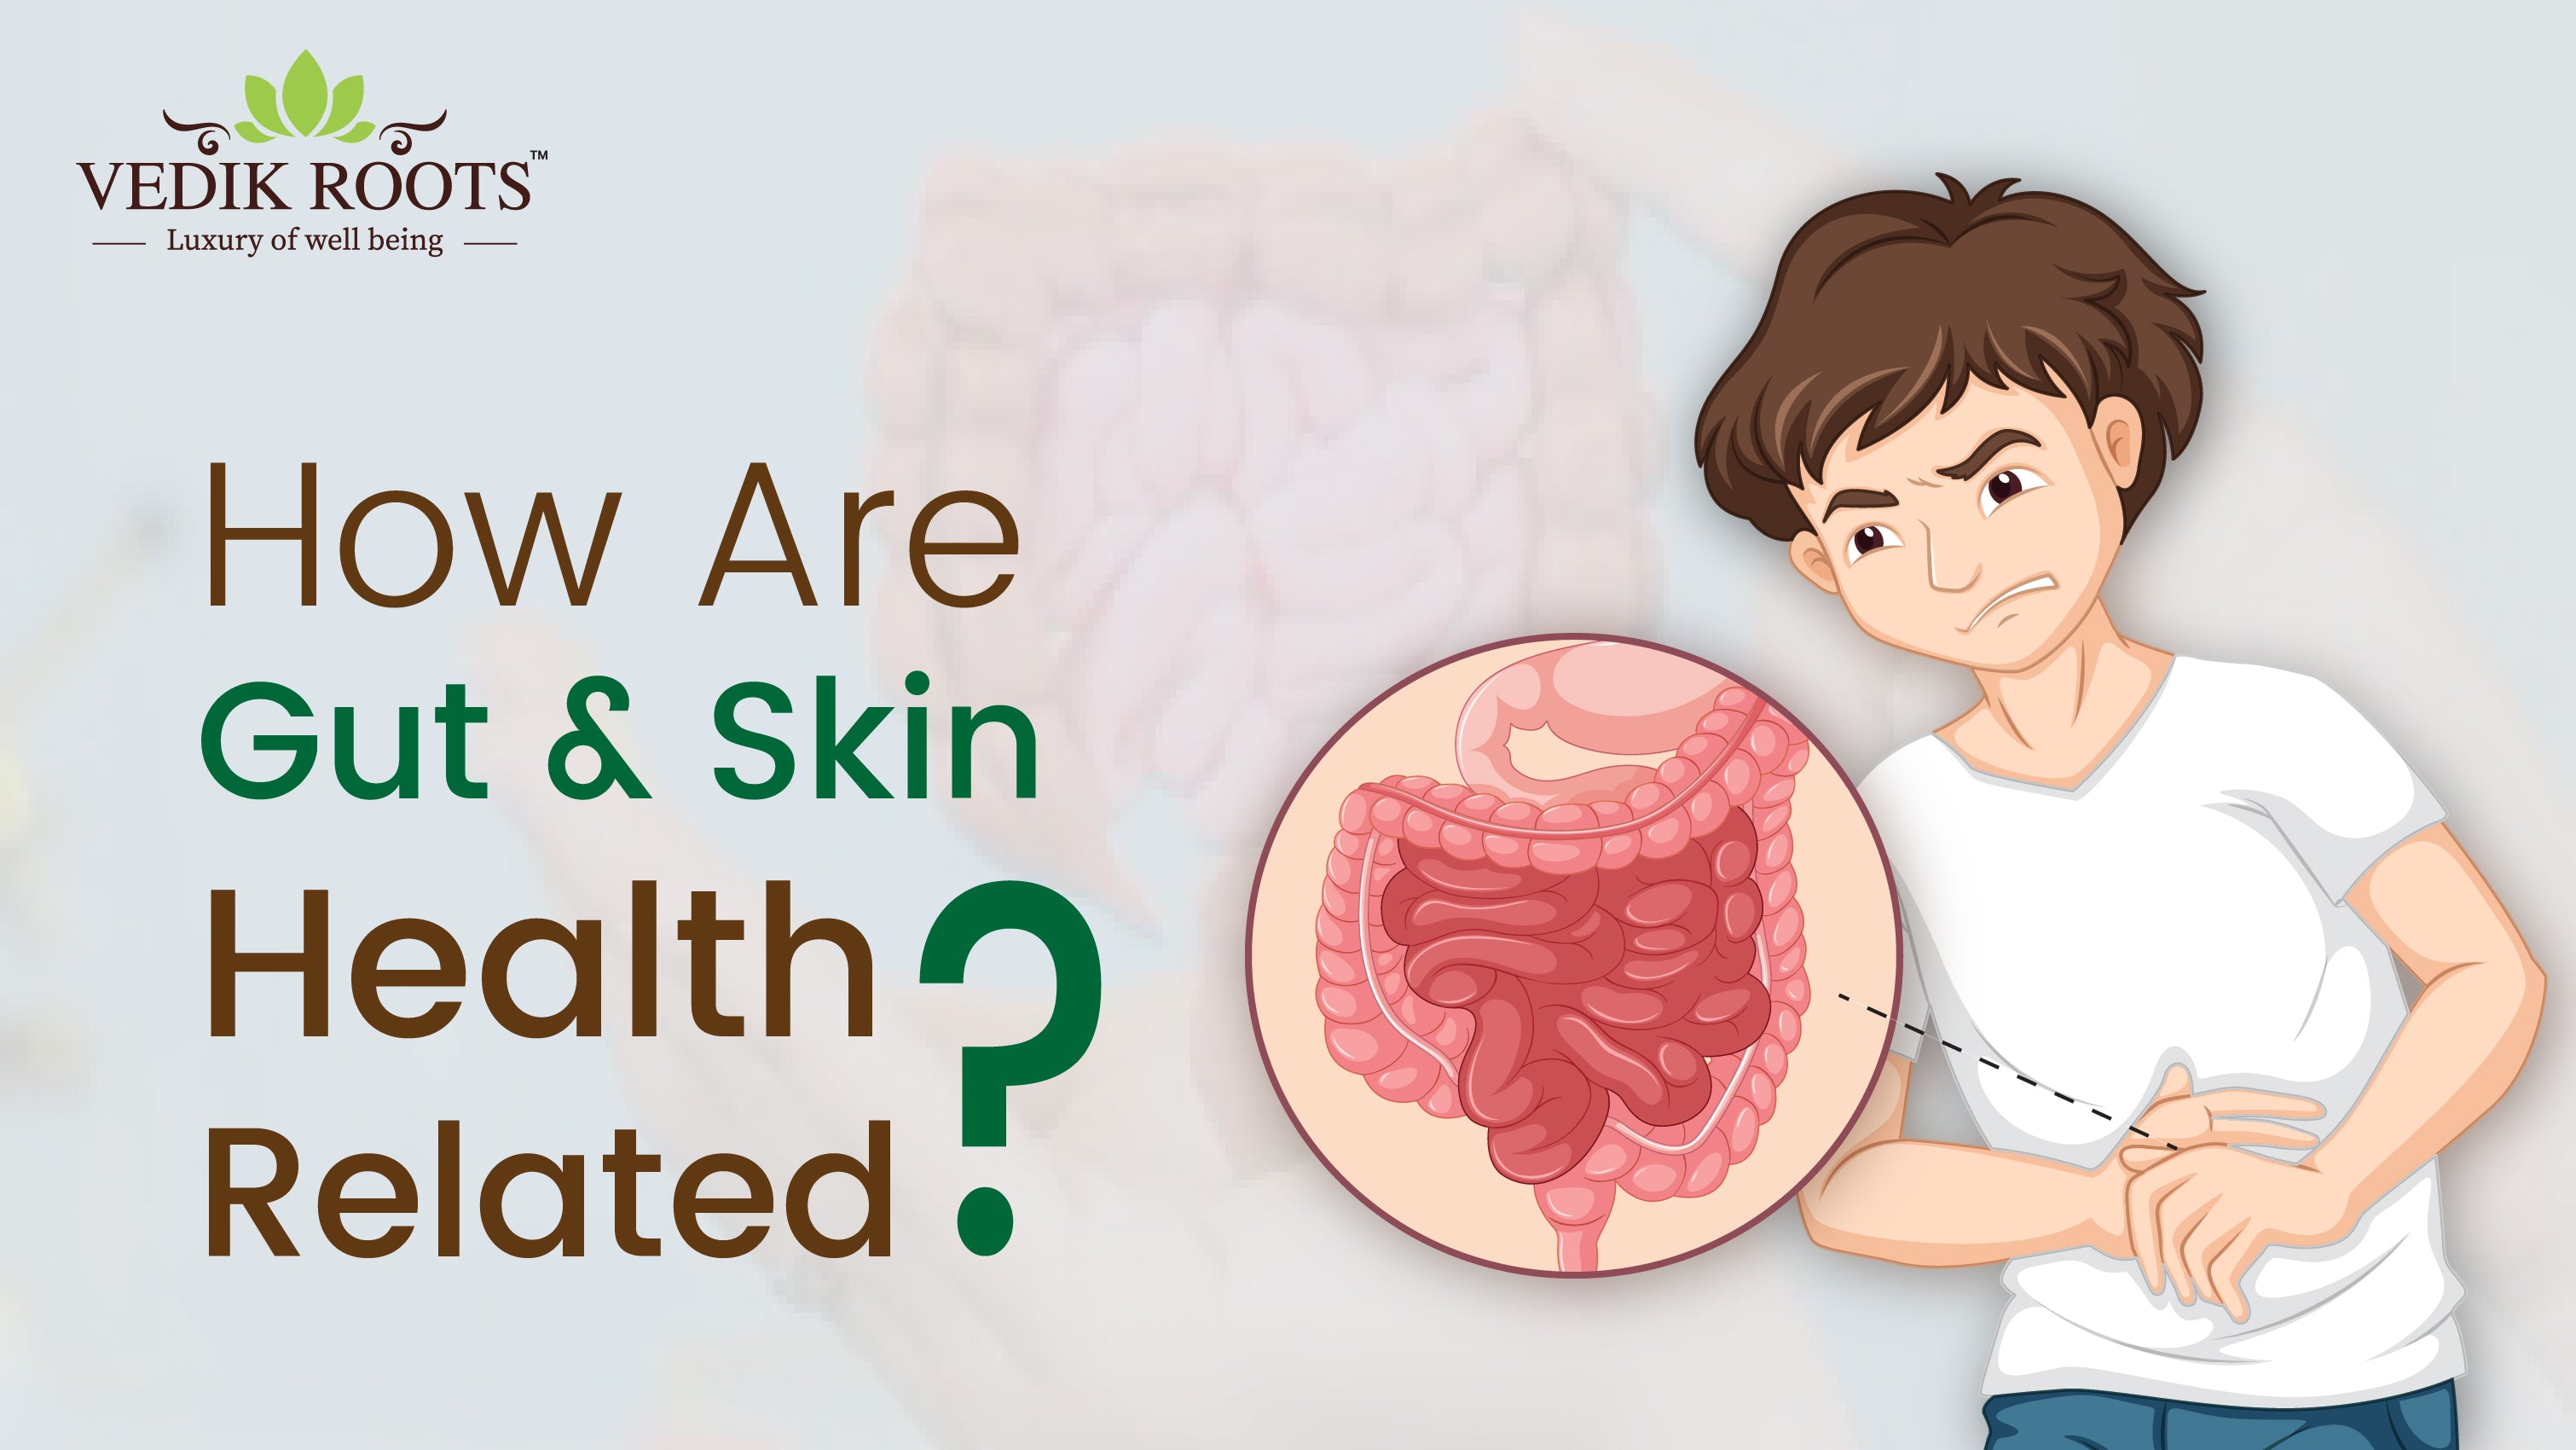 How are Gut & Skin Health Related?